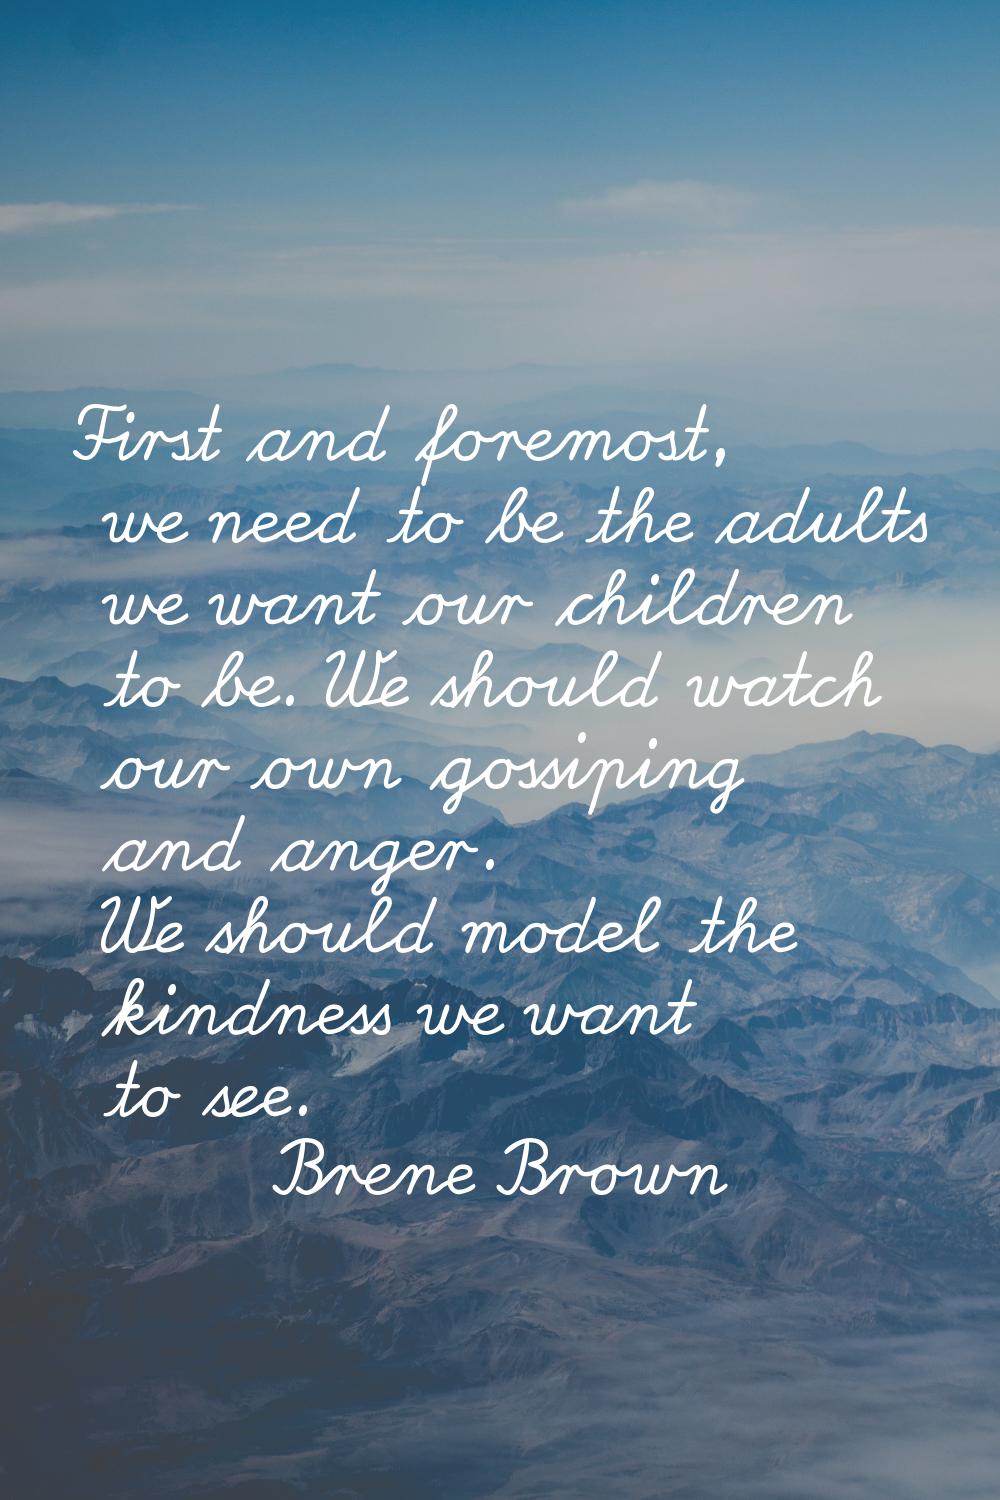 First and foremost, we need to be the adults we want our children to be. We should watch our own go